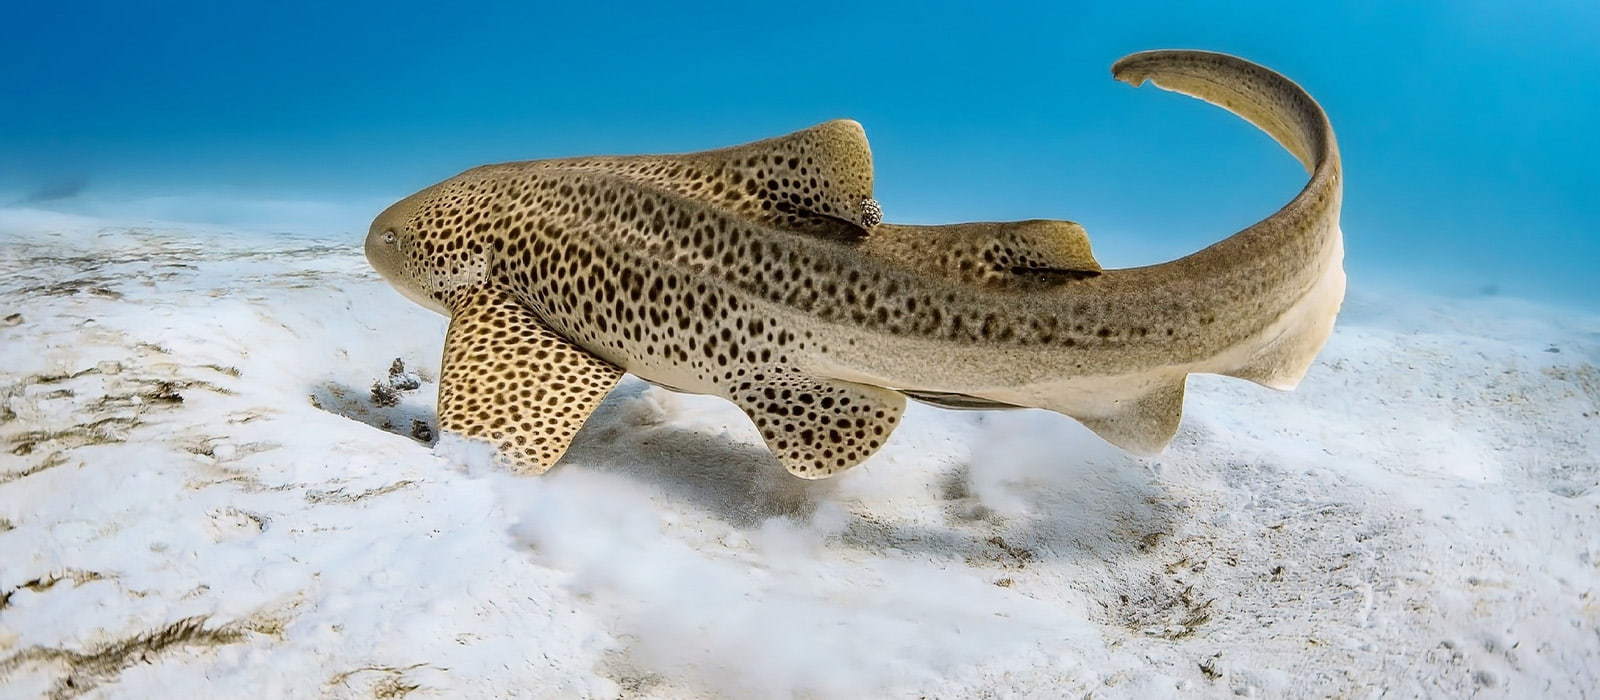 A brown, spotted Indo-Pacific leopard shark swimming along the seafloor.